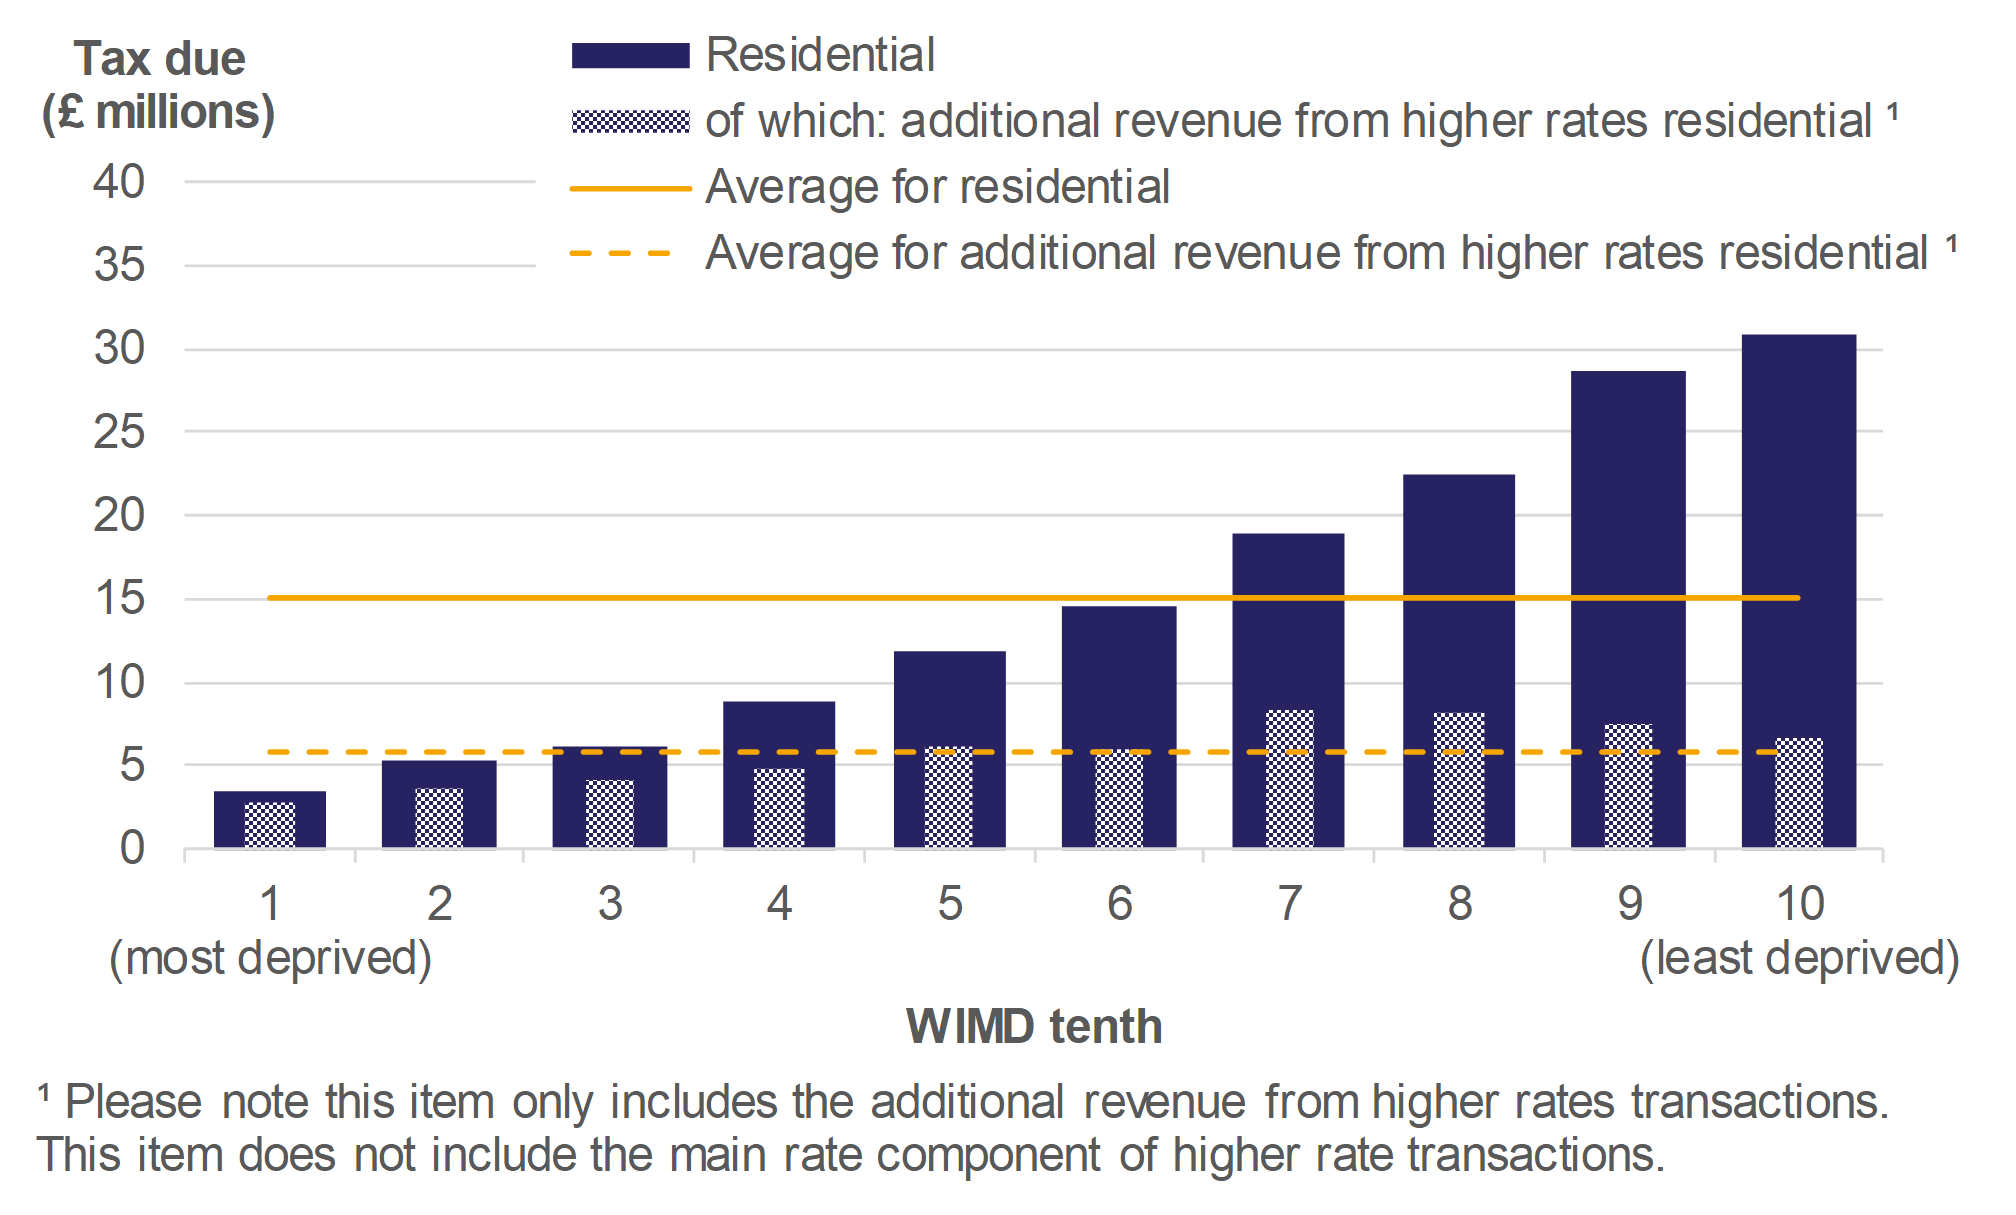 Figure 9.2 shows the amount of tax due on residential transactions and additional revenue from the higher rates, by WIMD tenth, for April 2018 to March 2019. Average values over all WIMD tenths are also presented.